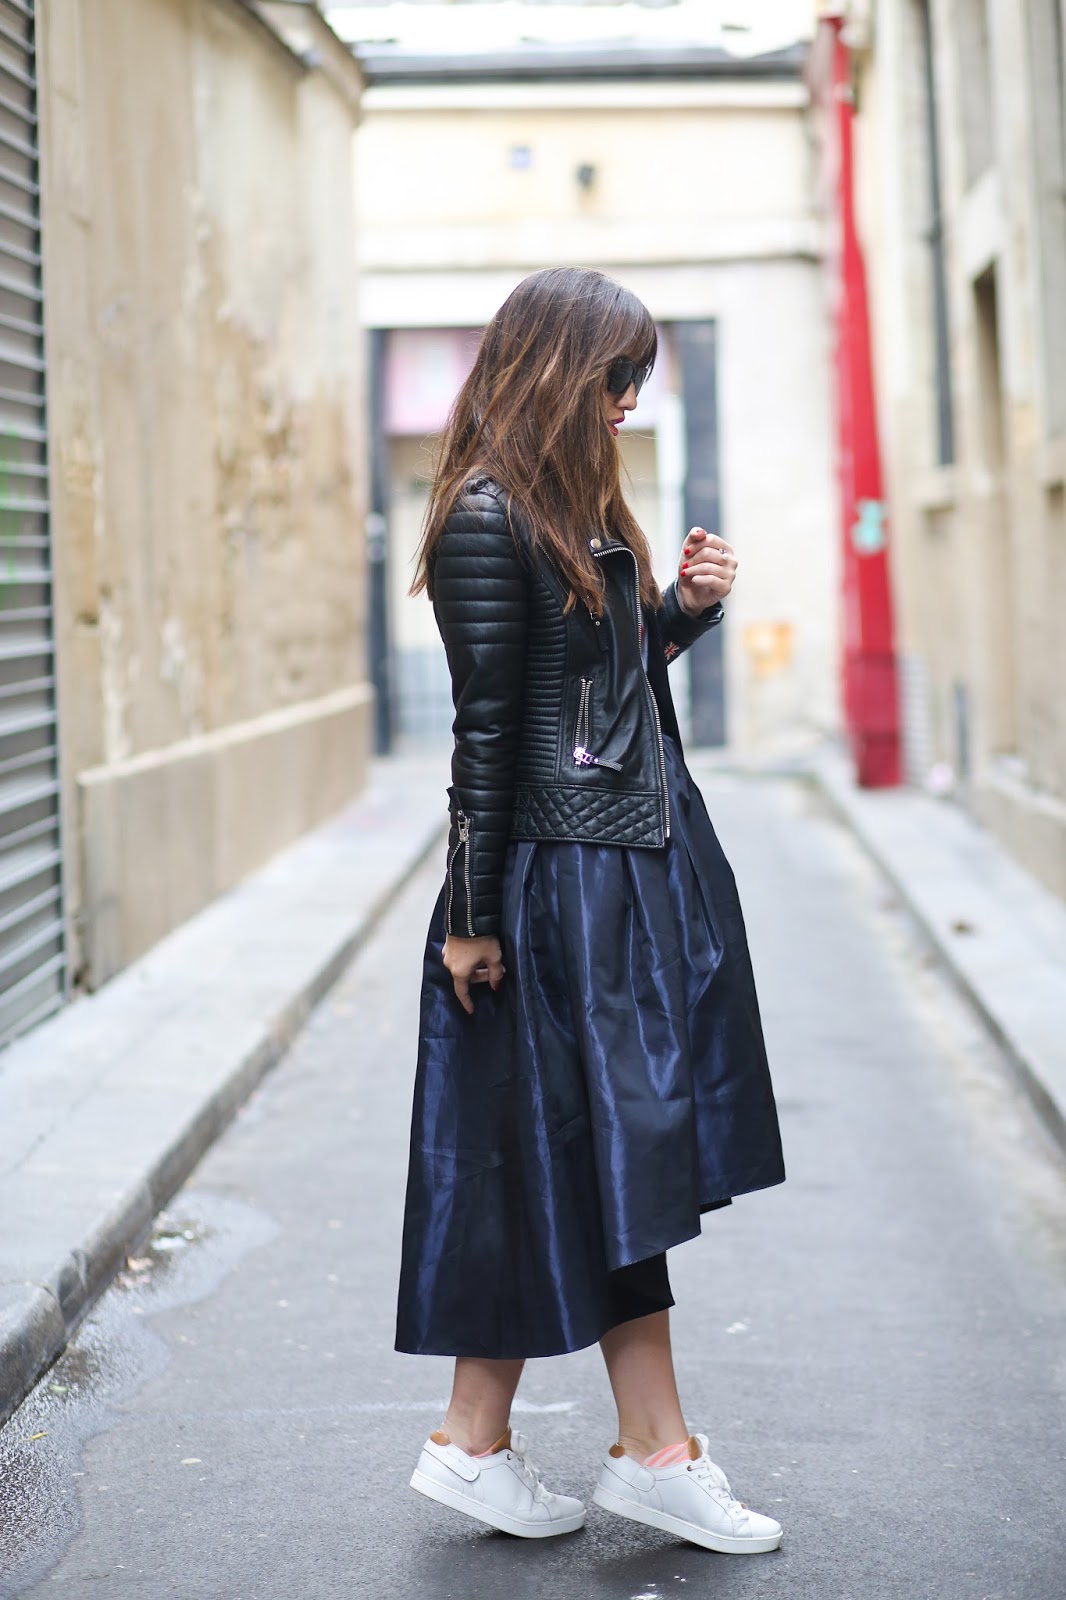 Barons Papillom, Streetstyle, Blog Mode Paris, Chic Style, Sneaker Style